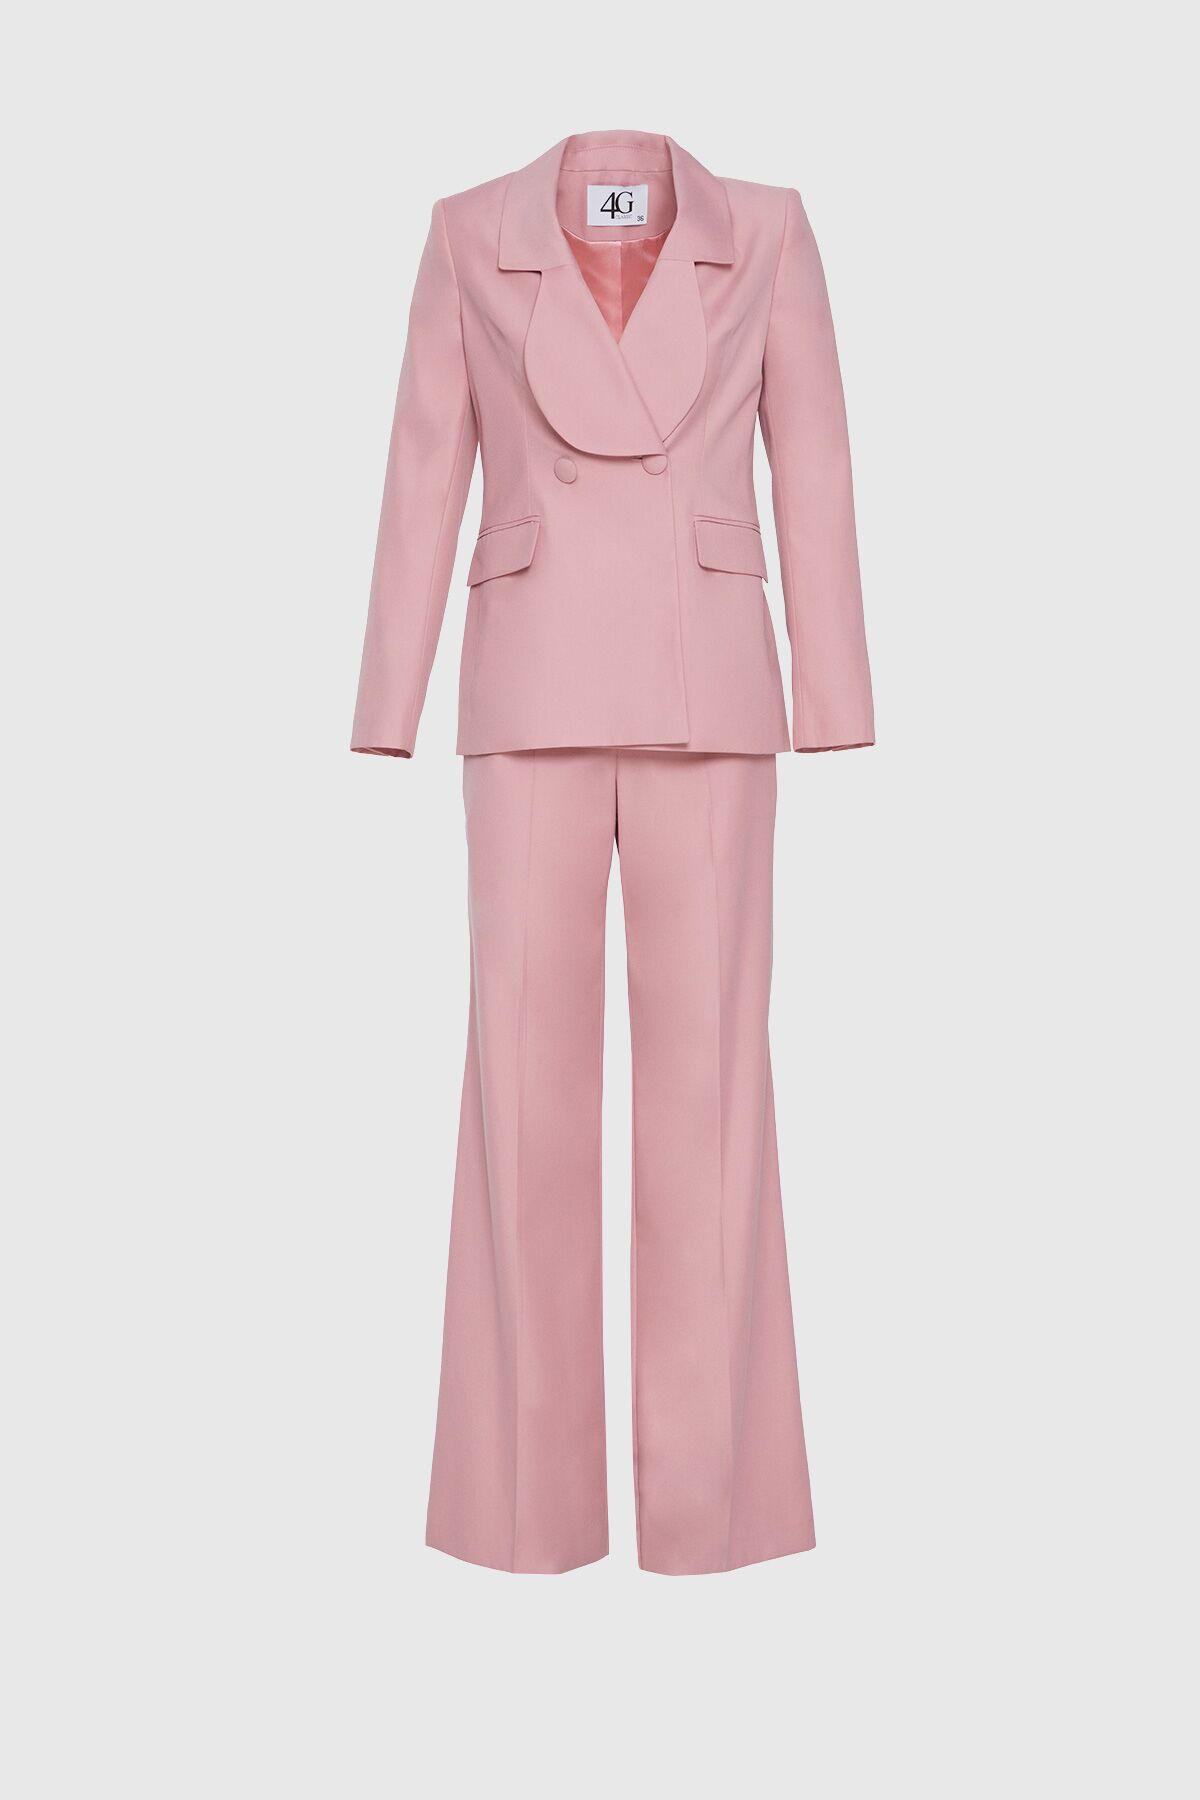 4G CLASSIC - Double Buttoned Powder Suit with Palazzo Pants